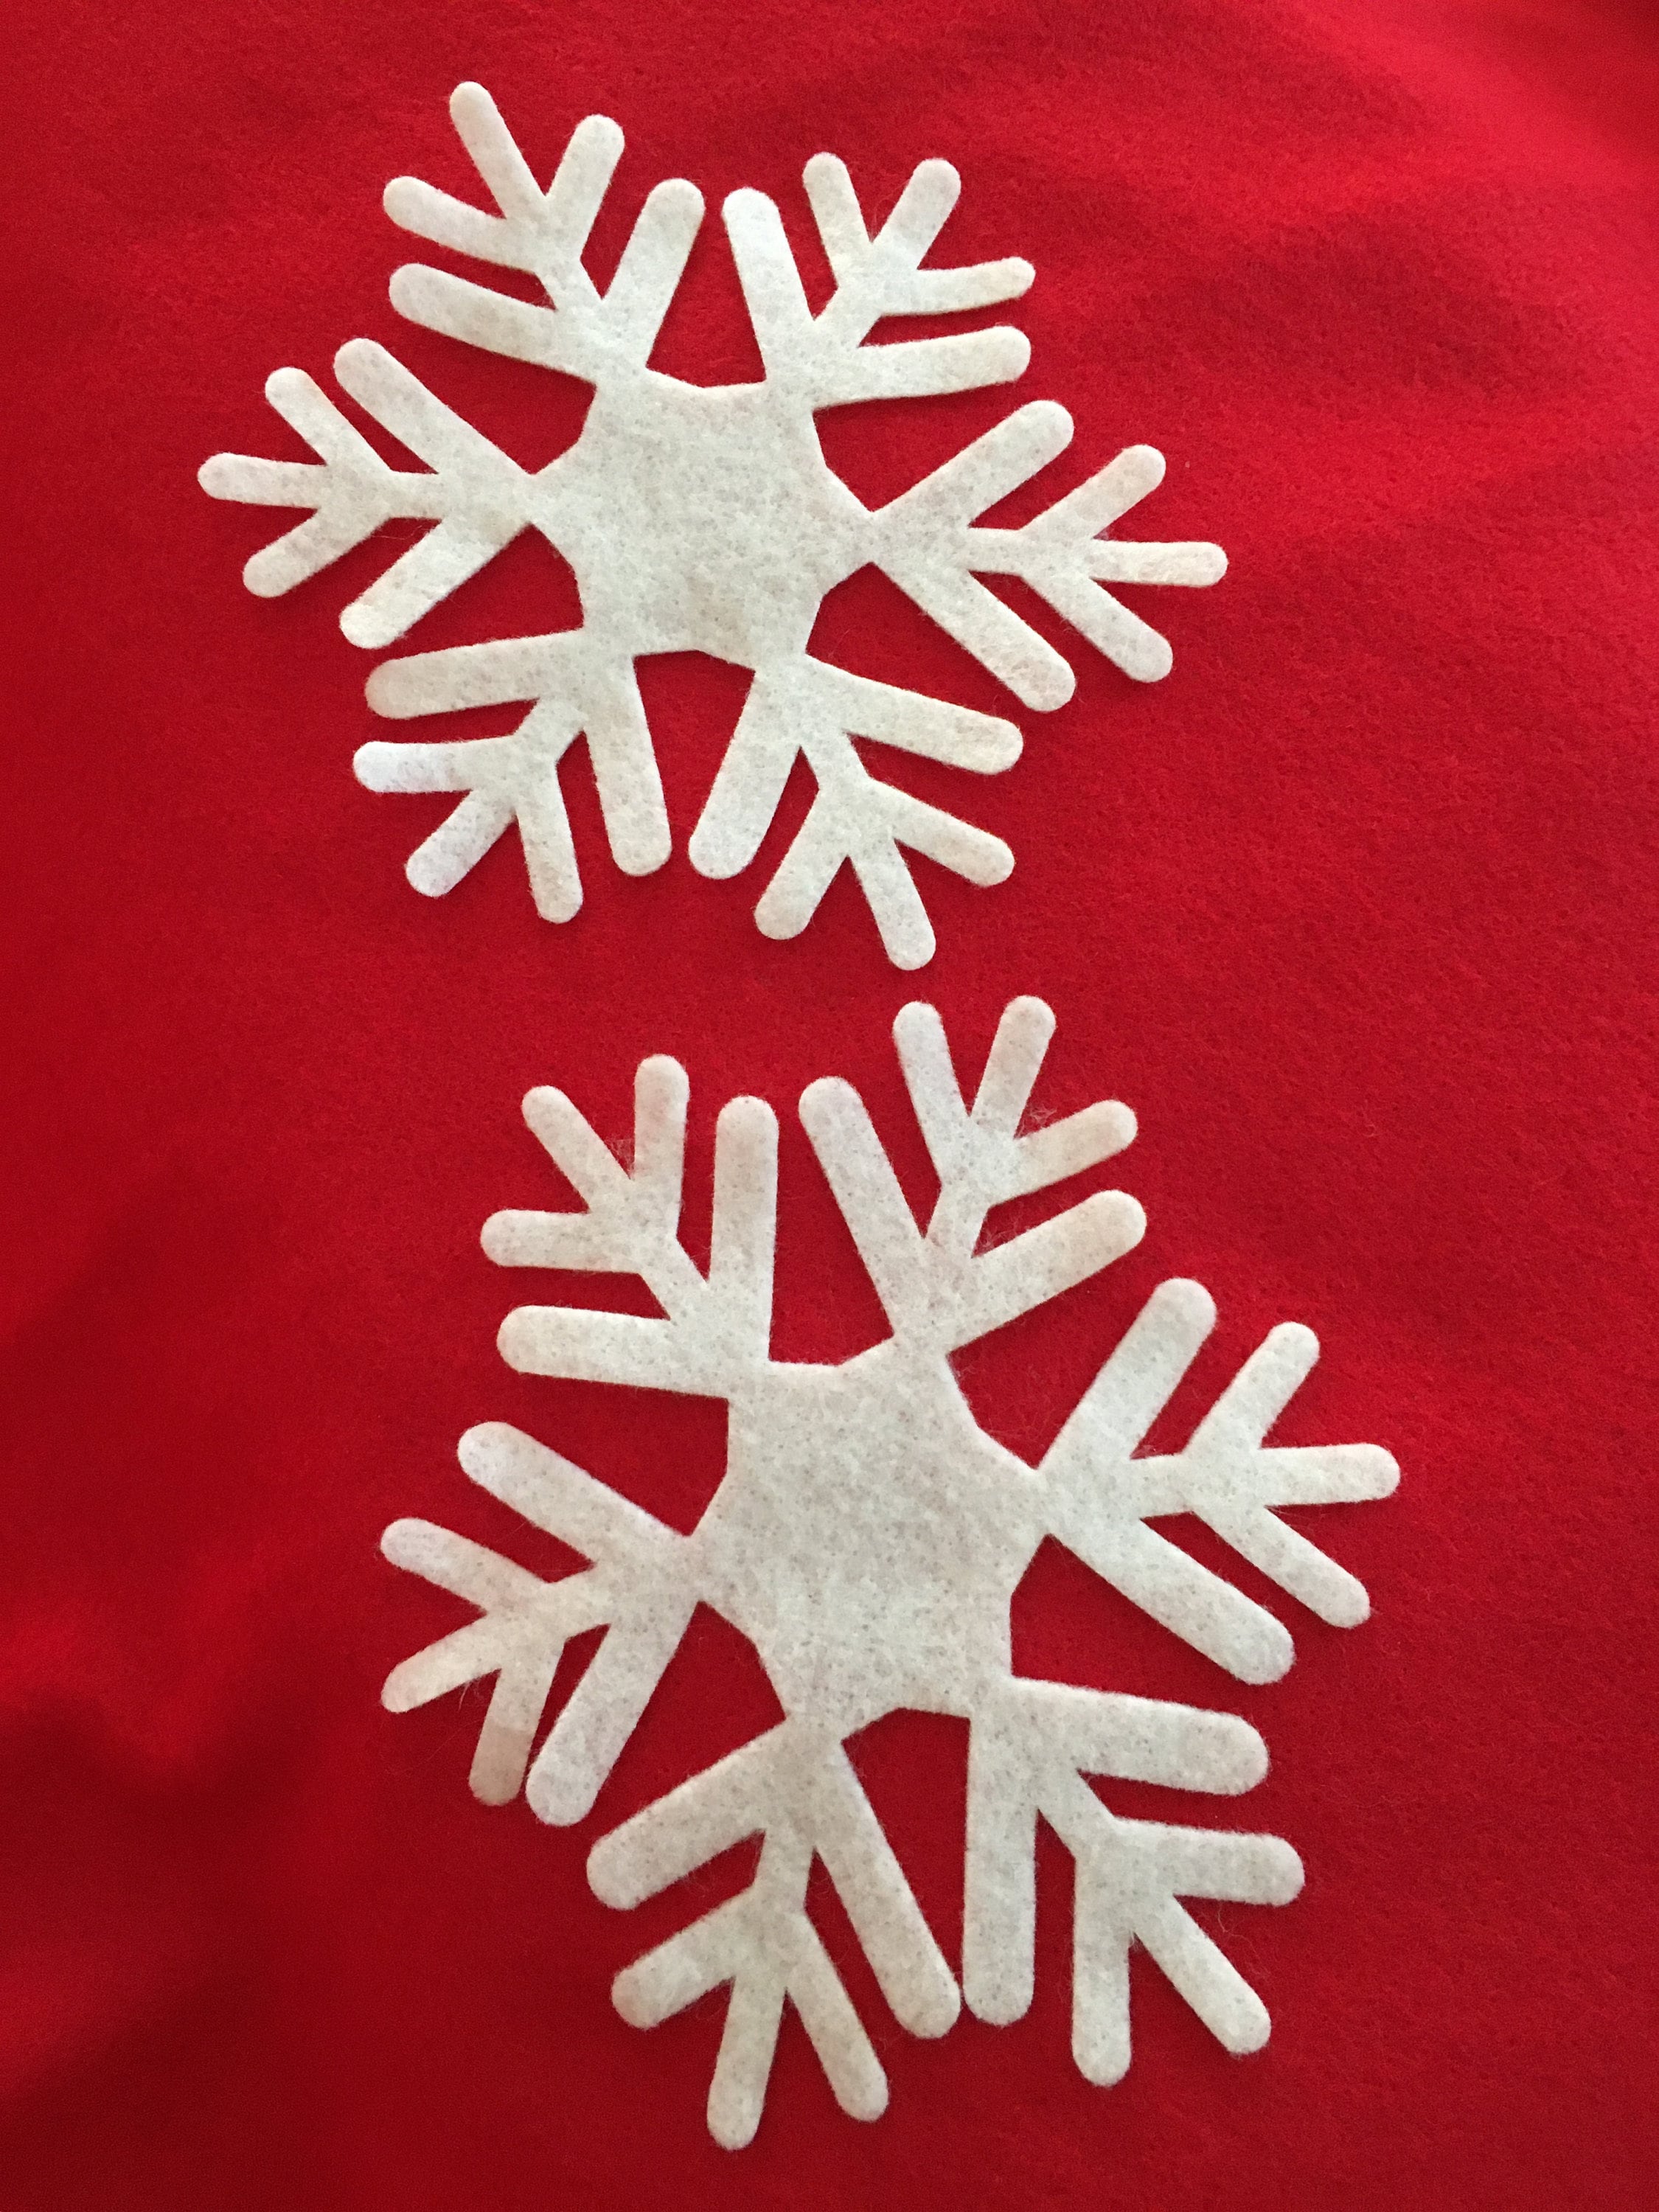  Small Felt Snowflakes 50pcs 1inch - Handmade Holiday Decor  Cards Making Scrapbooking, Mini Fabric Snowflakes Mixed Colors Die Cuts Felt  Applique Red White Green (Mix) : Handmade Products